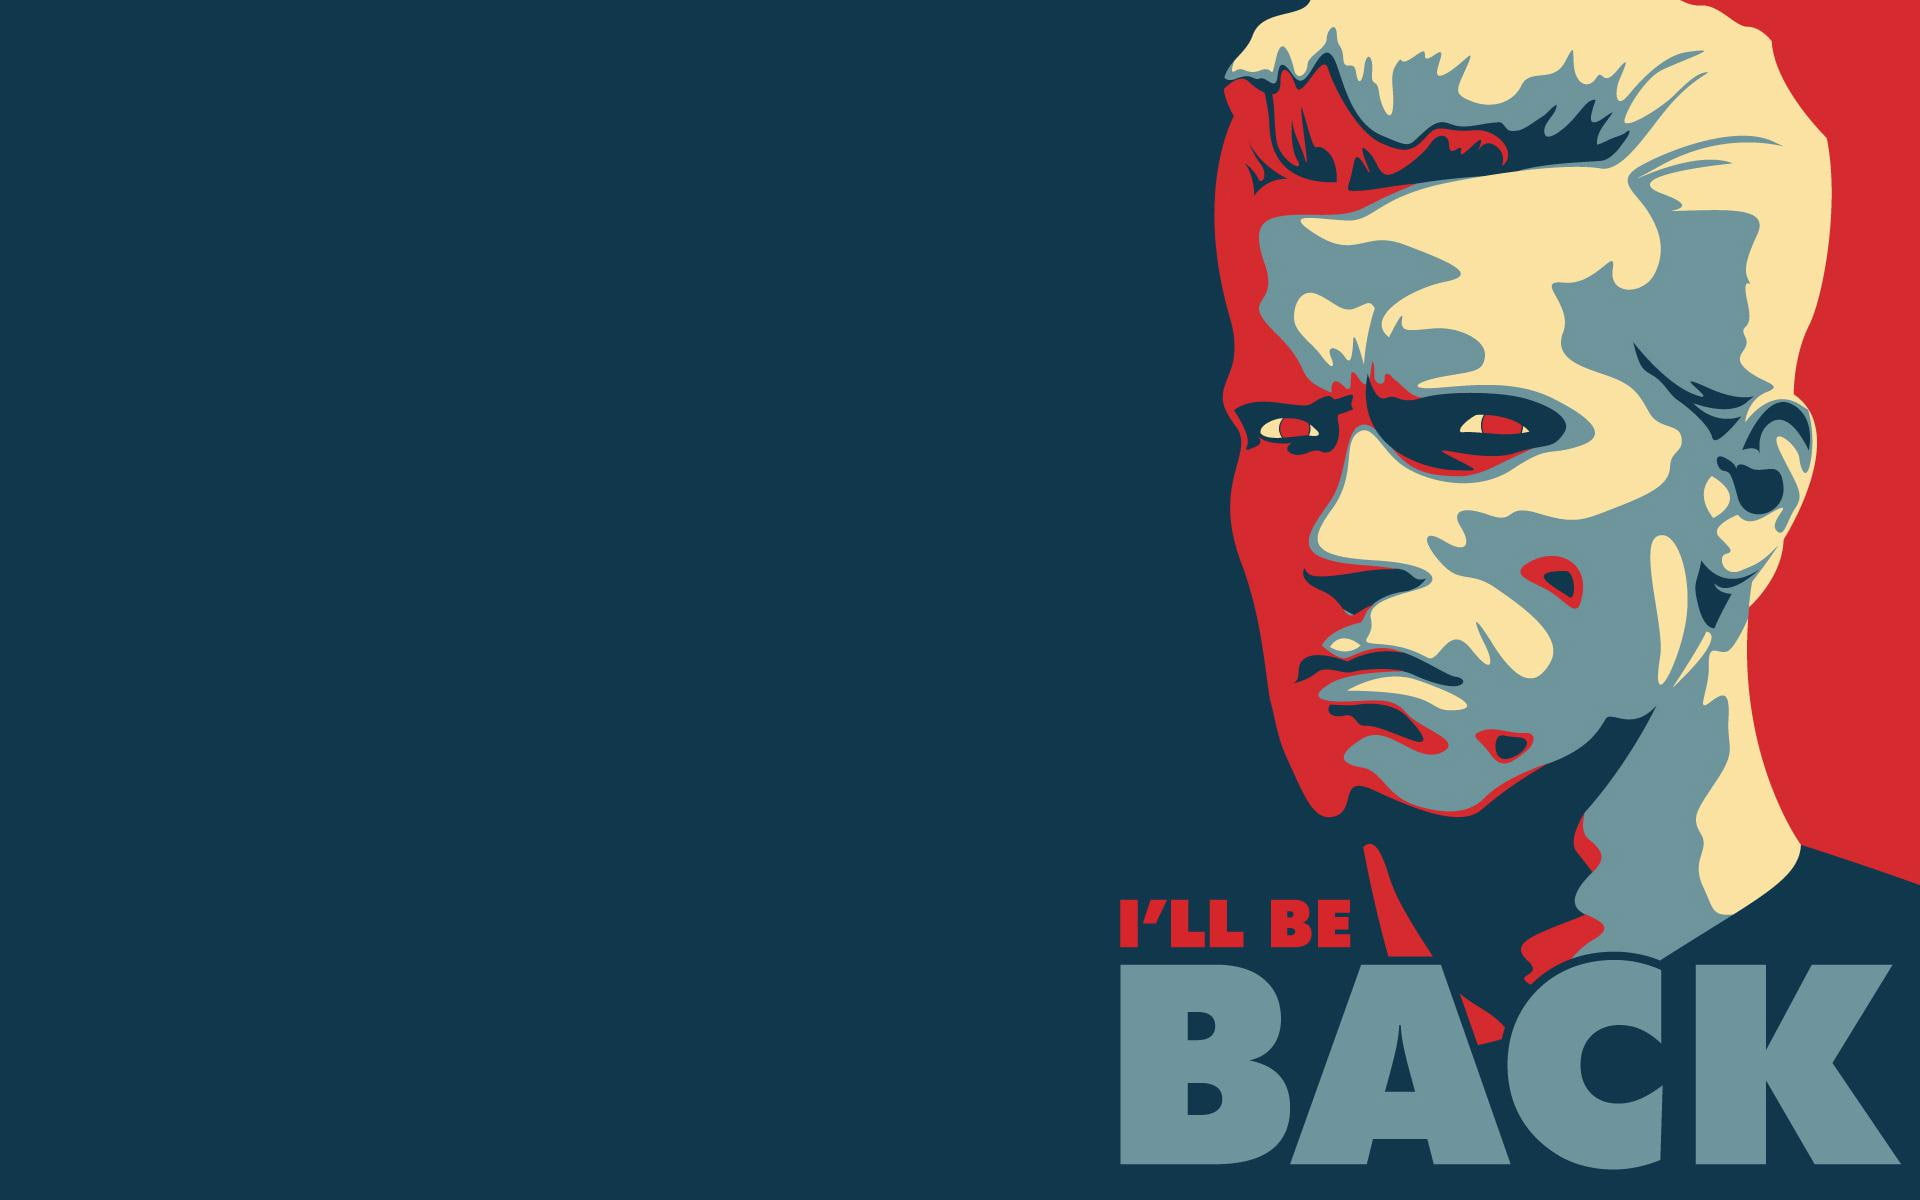 Terminator quote wallpaper, i’ll be back illustration, quotes, 1920×1200